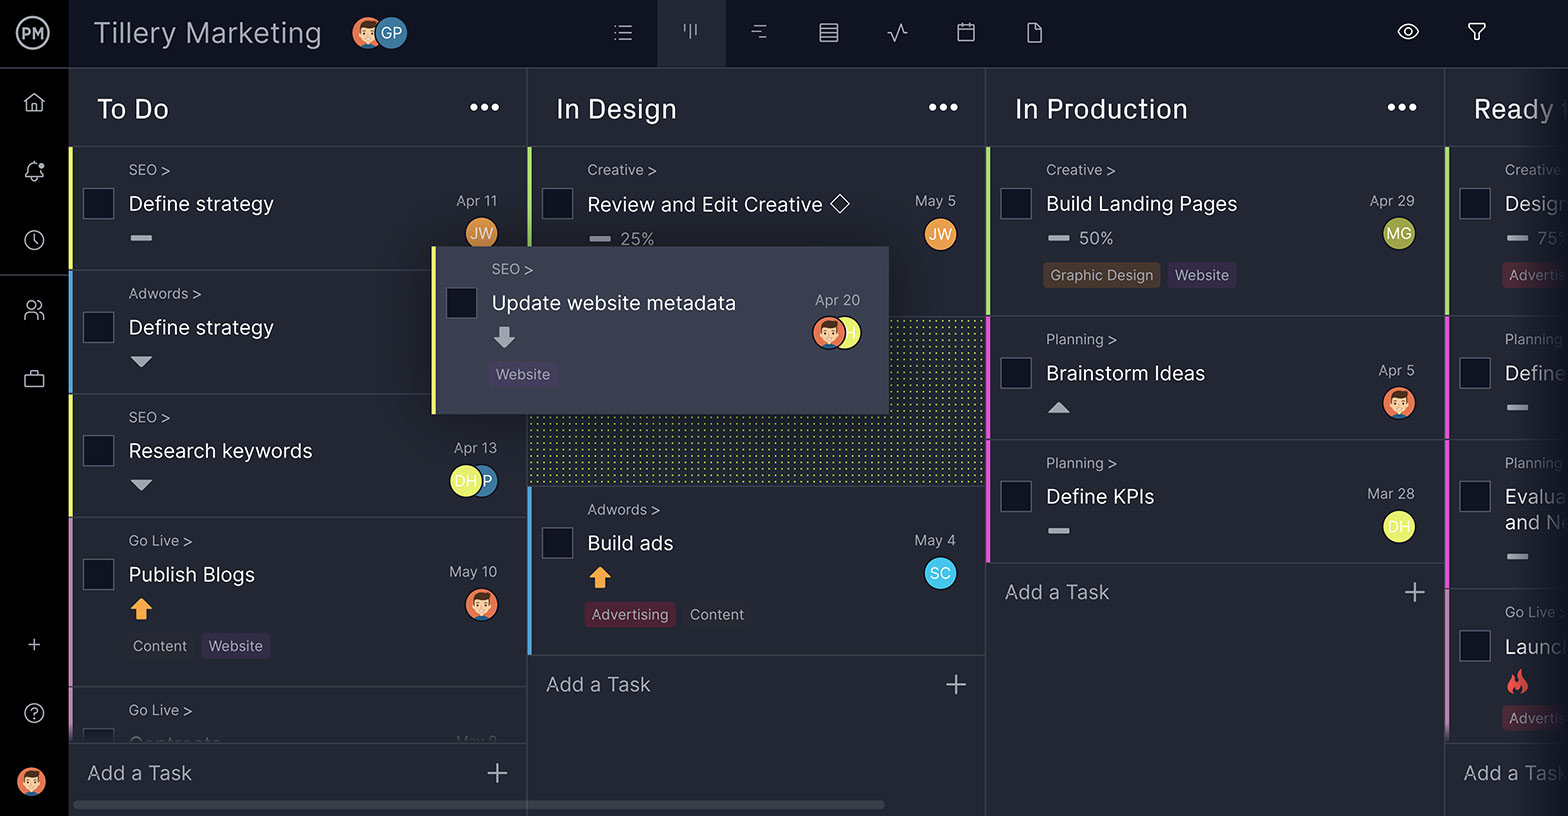 ProjectManager's workflow automation tools